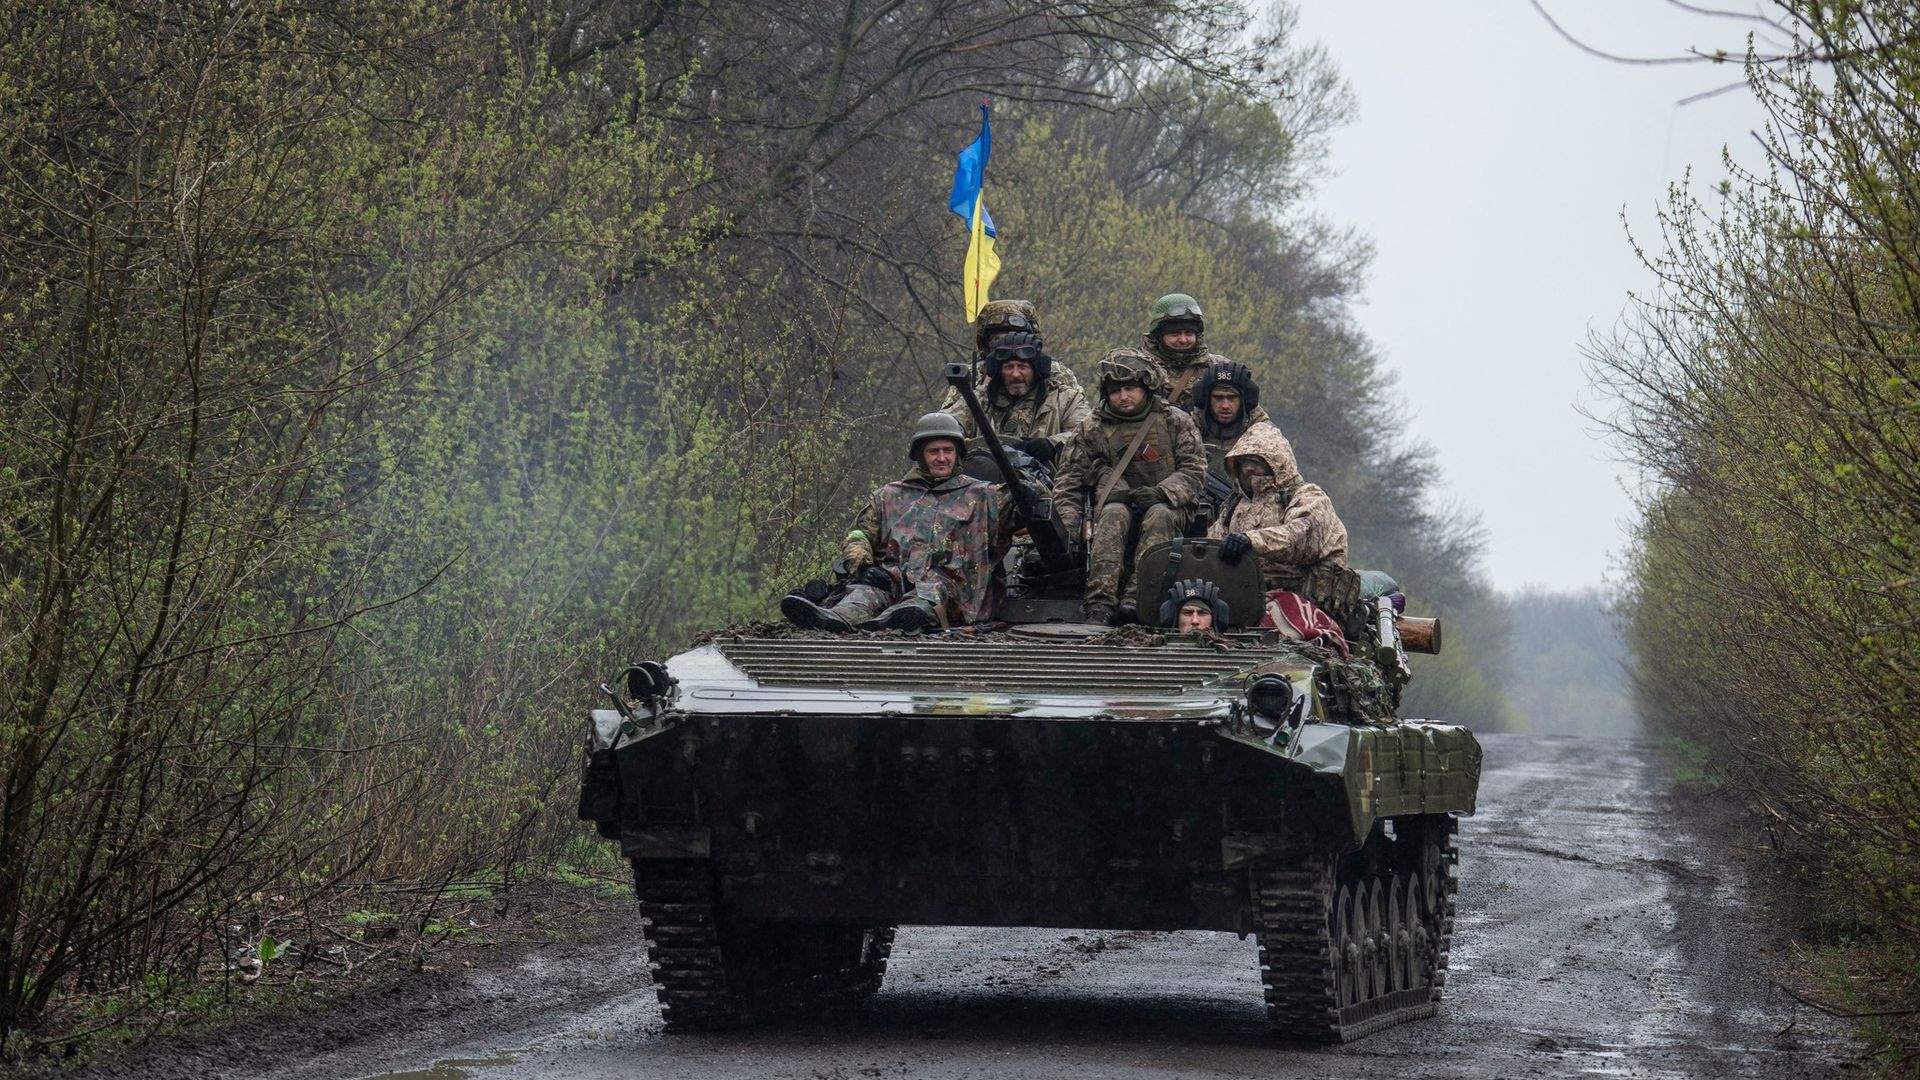 Kyiv says it is &quot;in a defensive position&quot; near Kupyansk